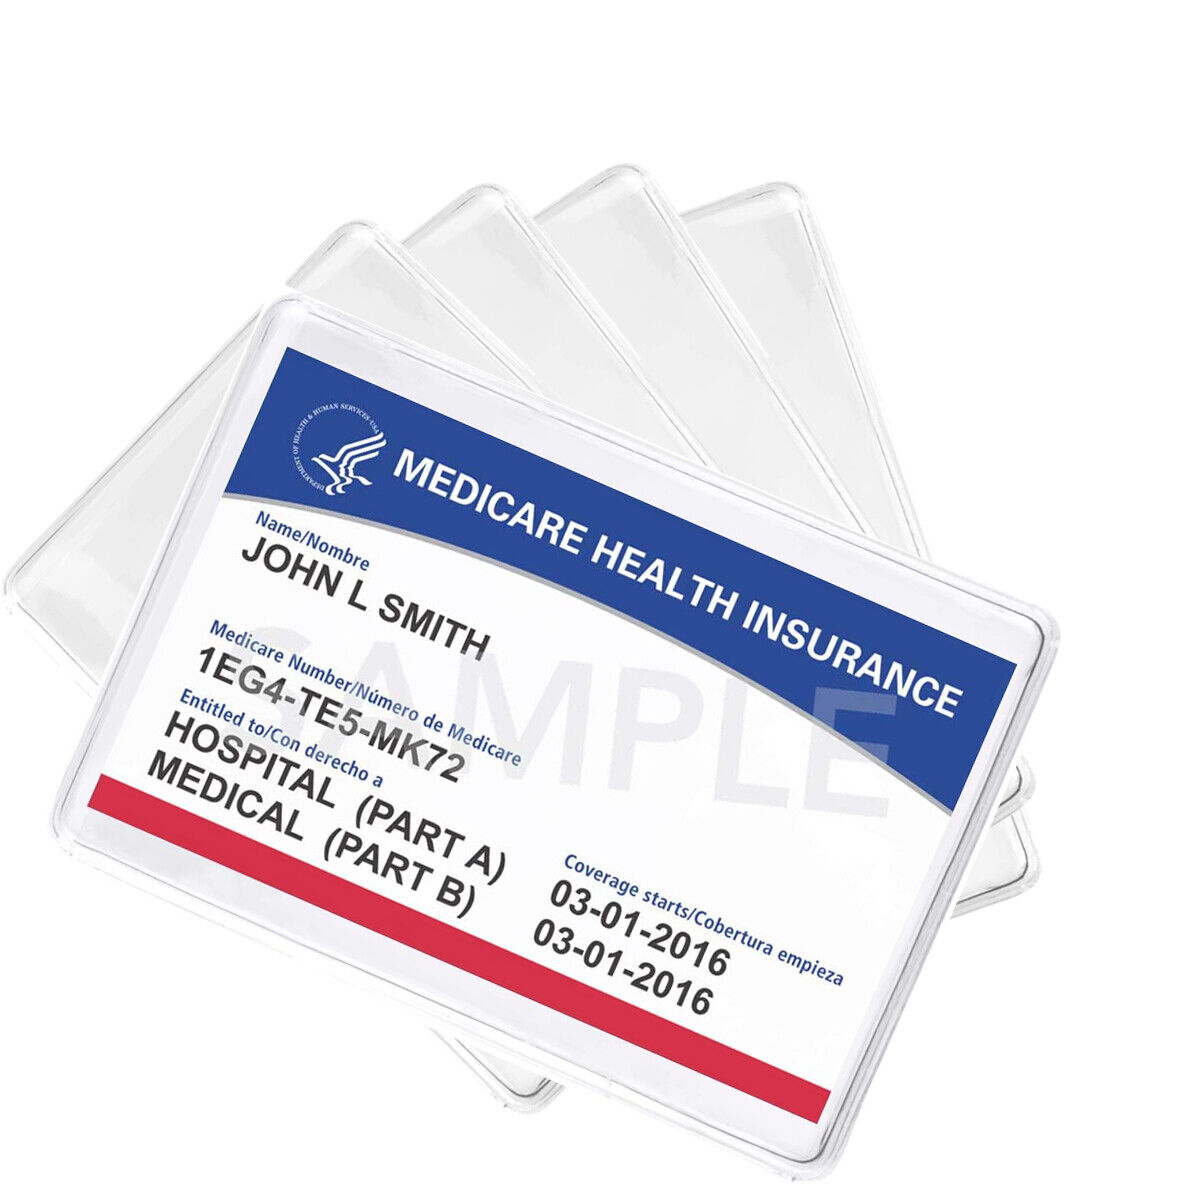 5 Pack - Medicare Card Holder Protector Sleeves - Clear Vinyl Credit Card Covers Specialist ID